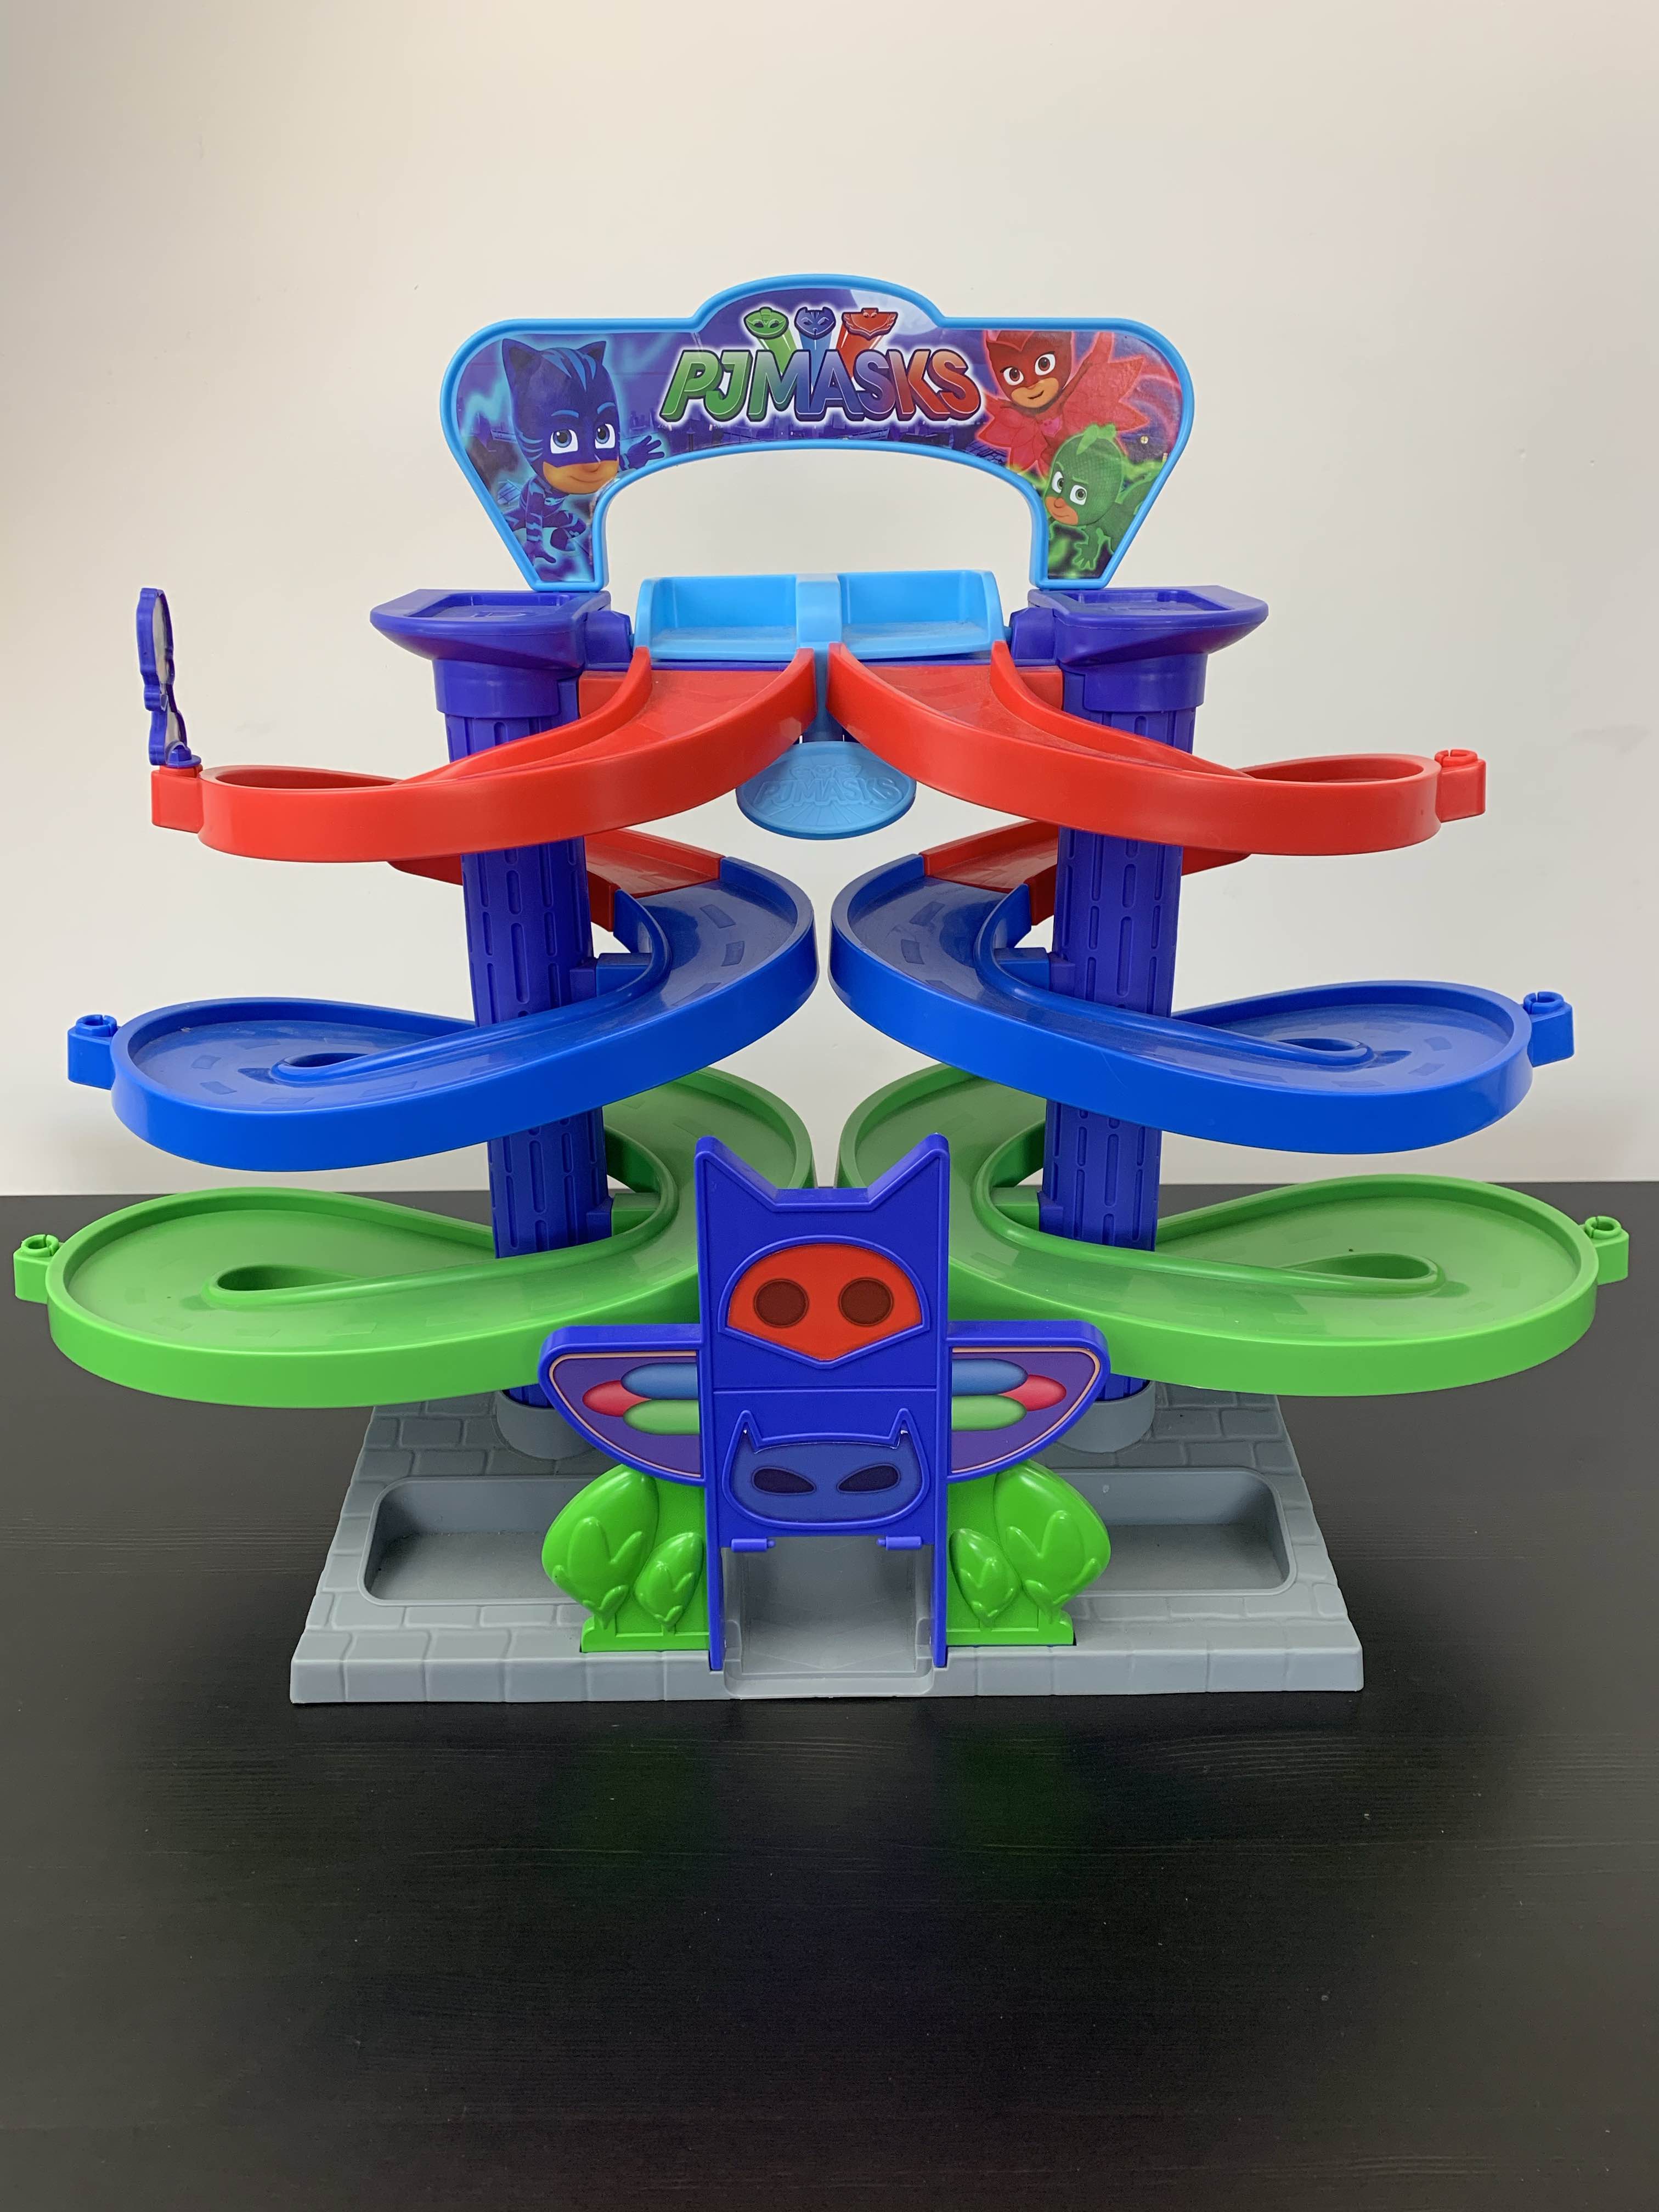 rival racers track playset